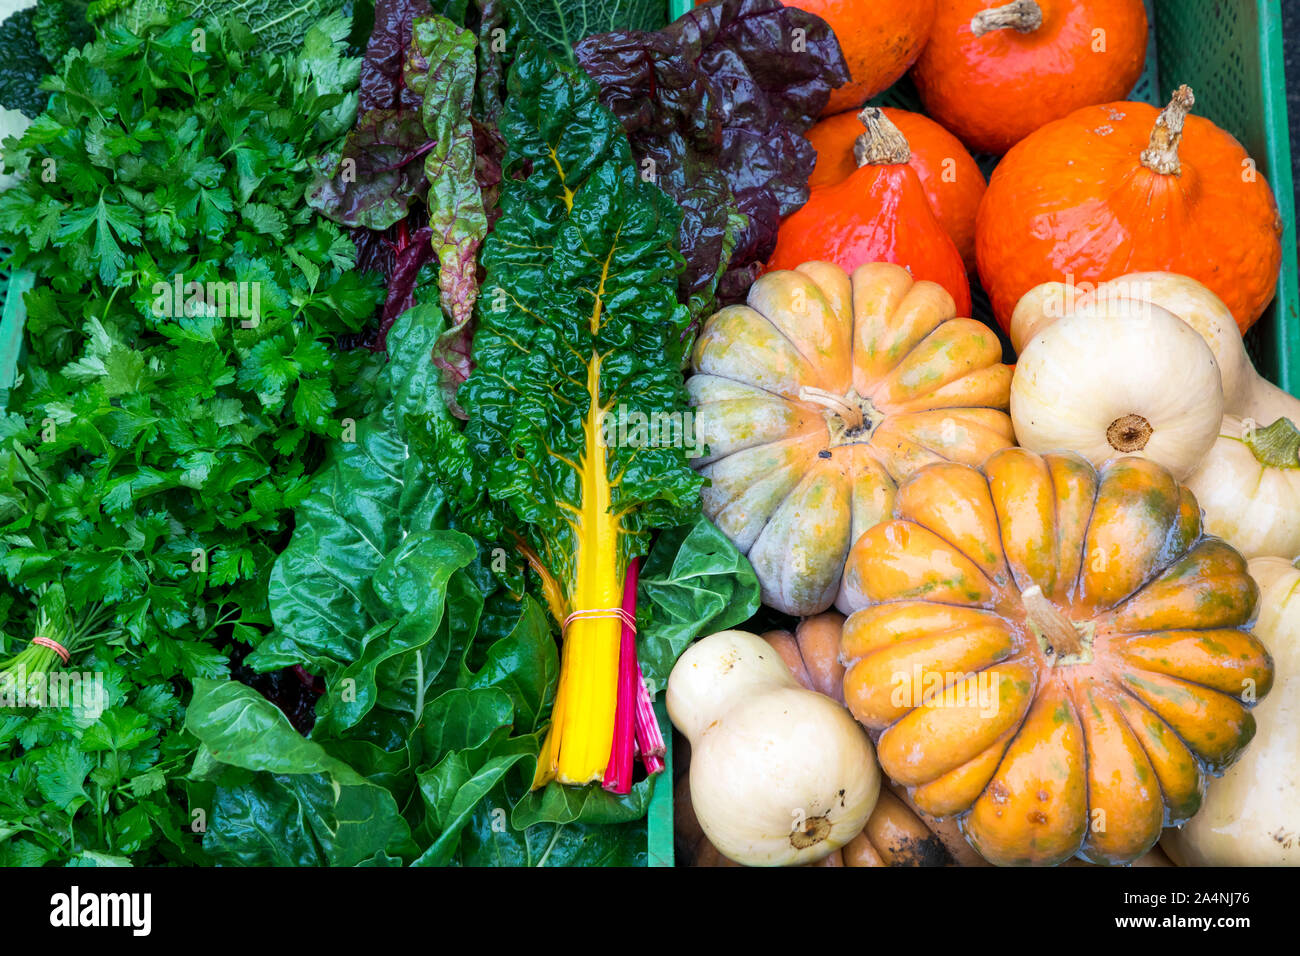 Vegetables, various vegetables, market stall, smooth parsley, chard, pumpkin, Stock Photo